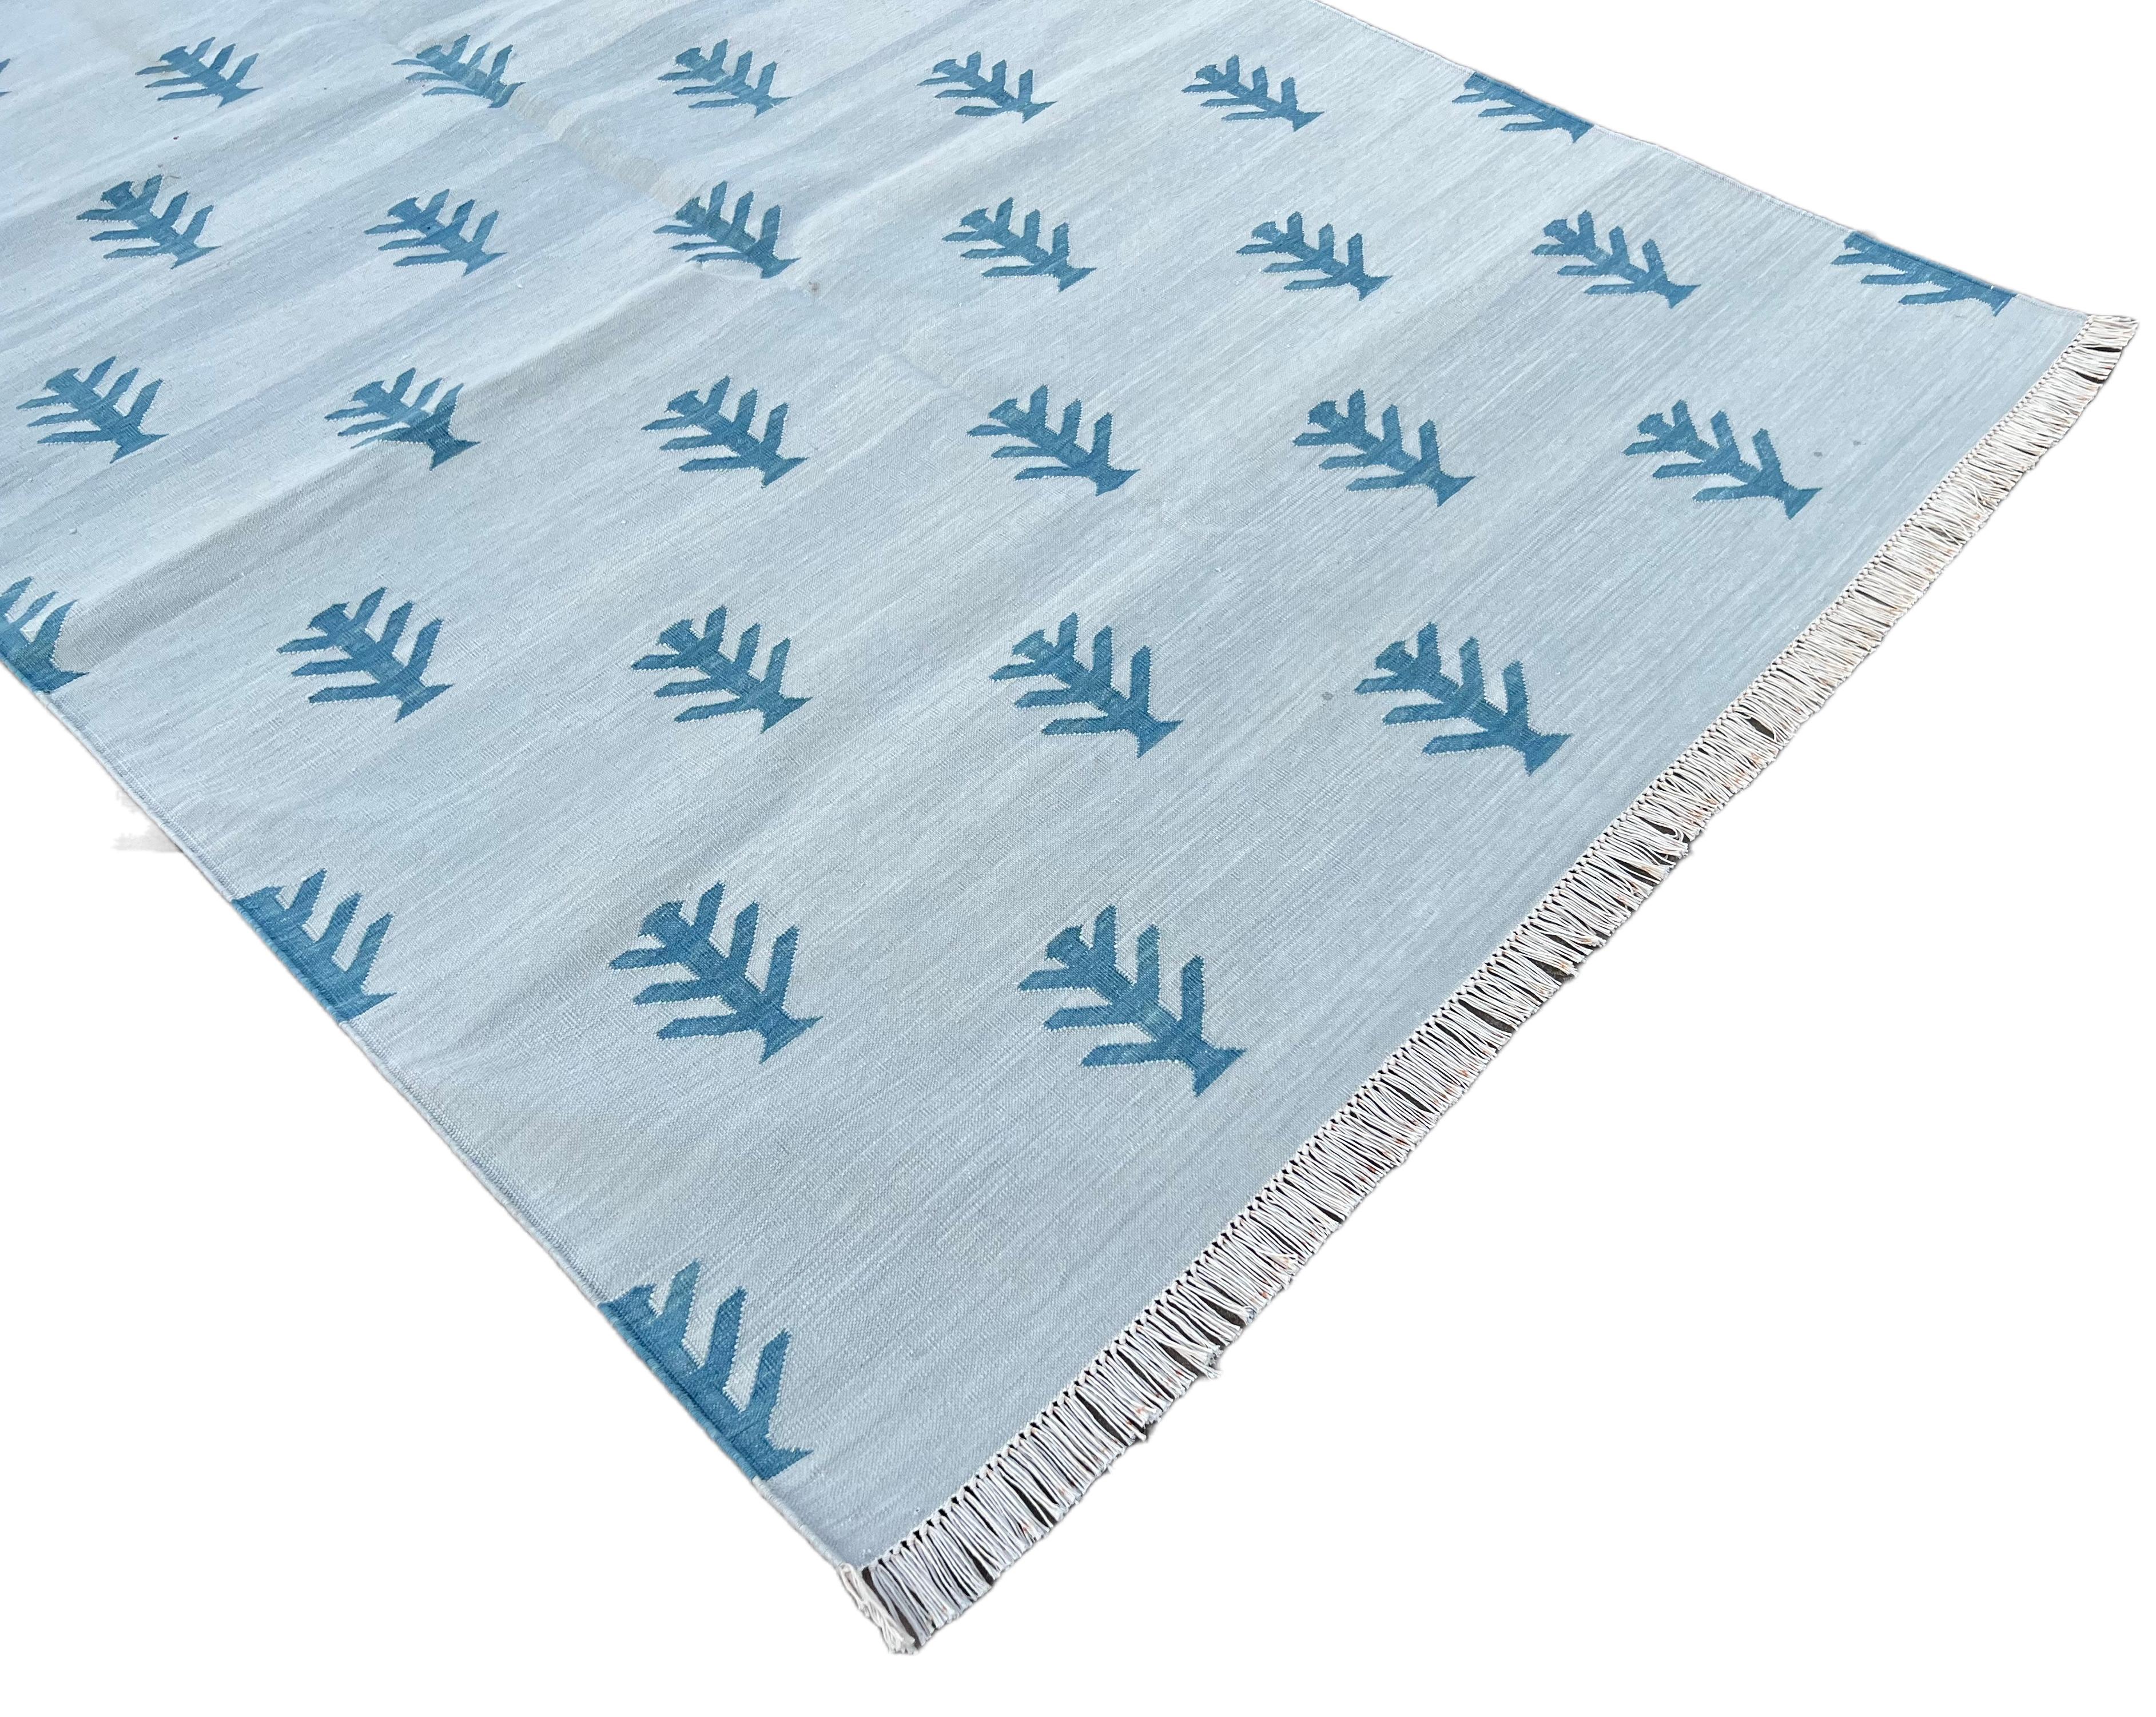 Hand-Woven Handmade Cotton Area Flat Weave Rug, 4x6 Grey, Blue Tree Pattern Indian Dhurrie For Sale